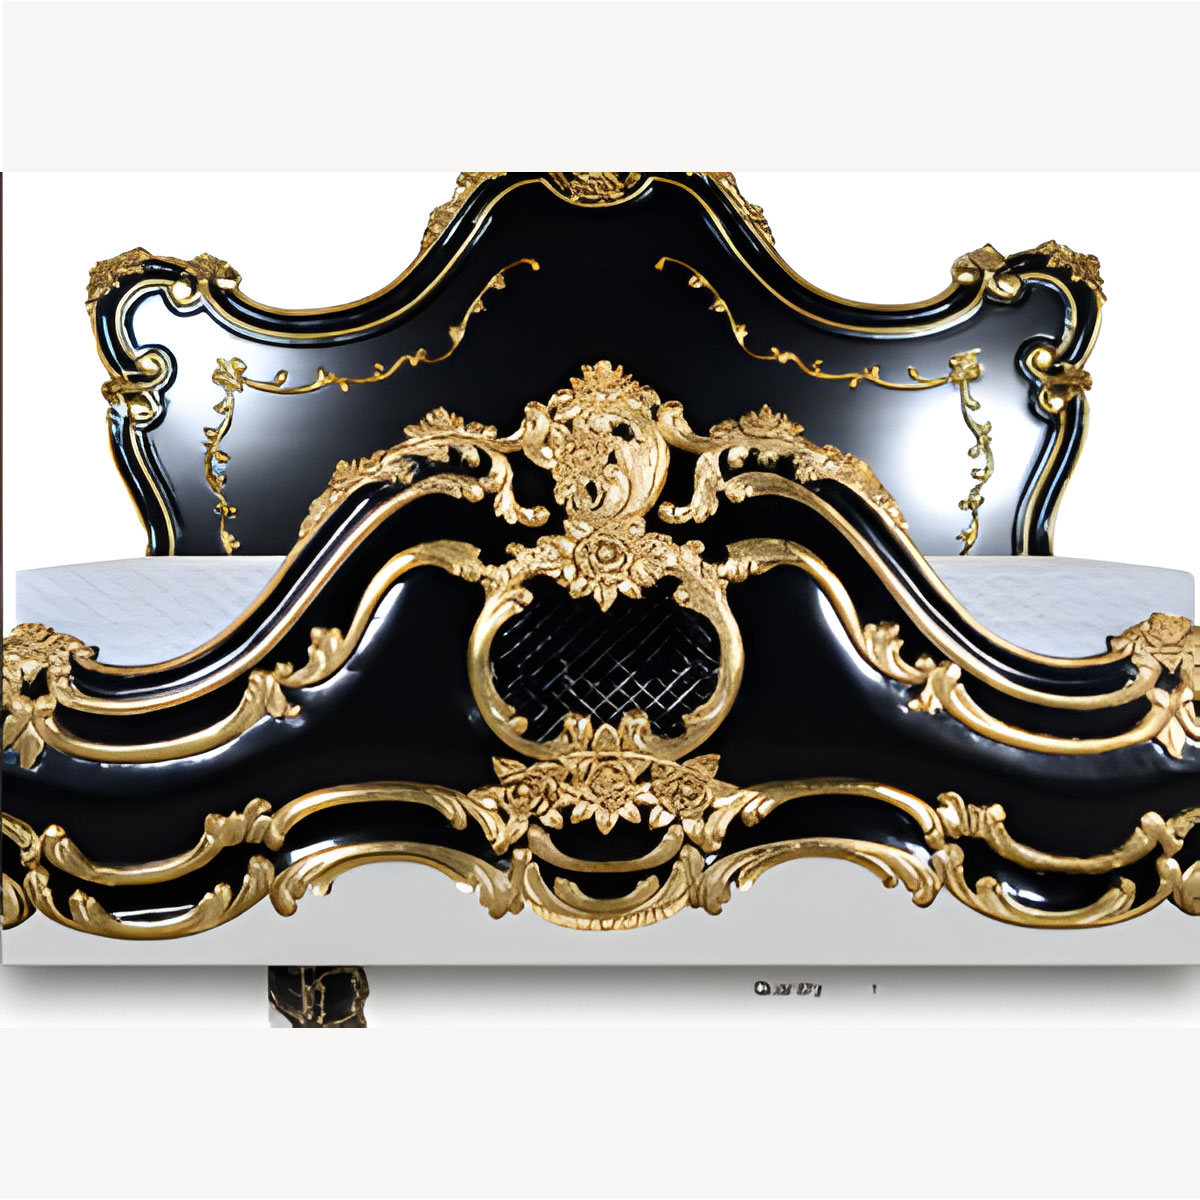 Versailles Ornate Bed In Black With Gold Detailing 3 - Hampshire Barn Interiors - Versailles Ornate Bed In Black With Gold Detailing -